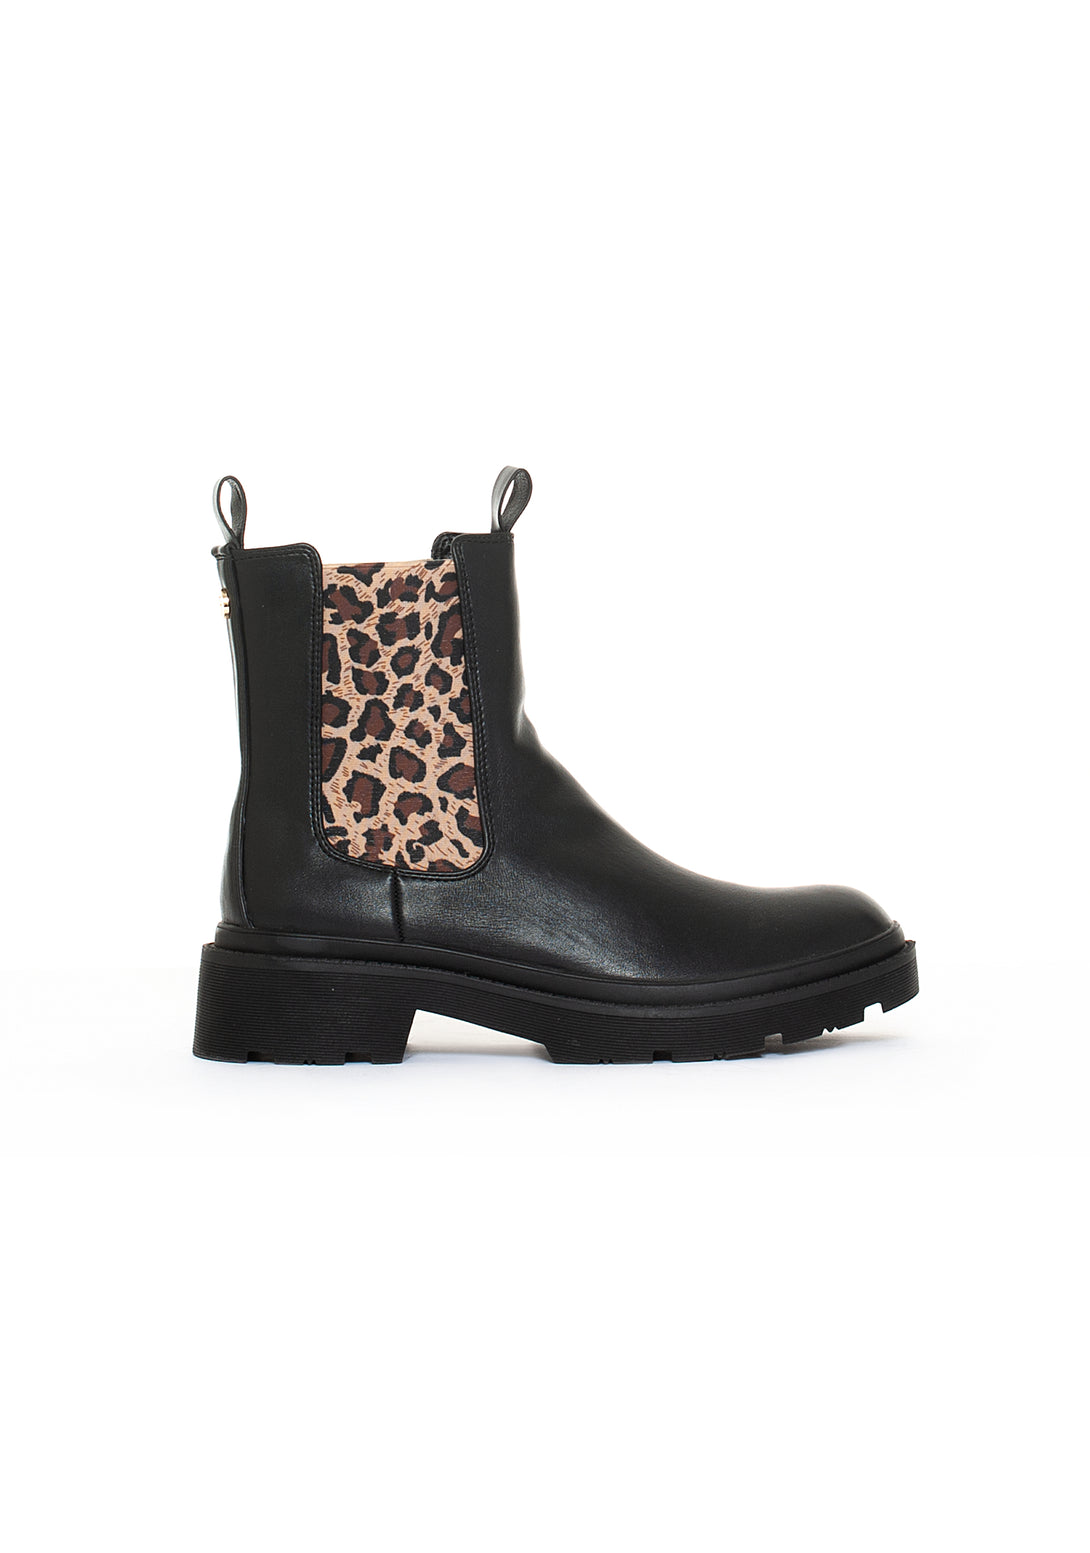 Chelsea boots made in eco leather with animalier details Fracomina F722WS5007P428L7-053